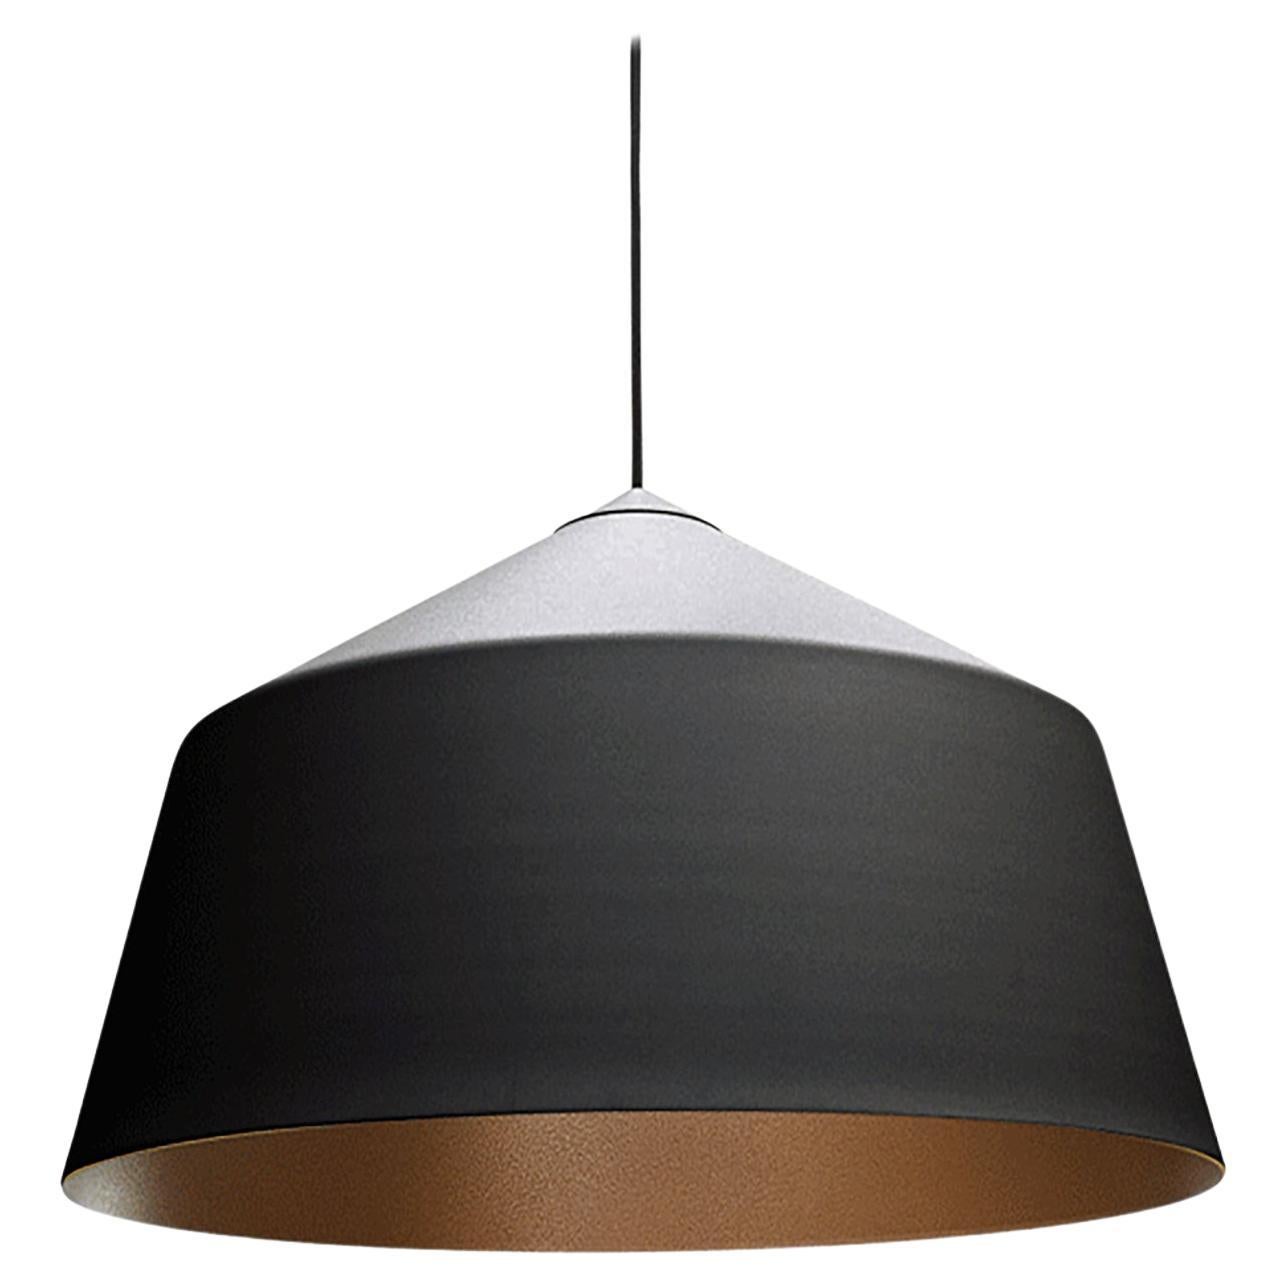 Circus Pendant Light Design By Corinna Warm Sm Large Black/Bronze In Stock For Sale